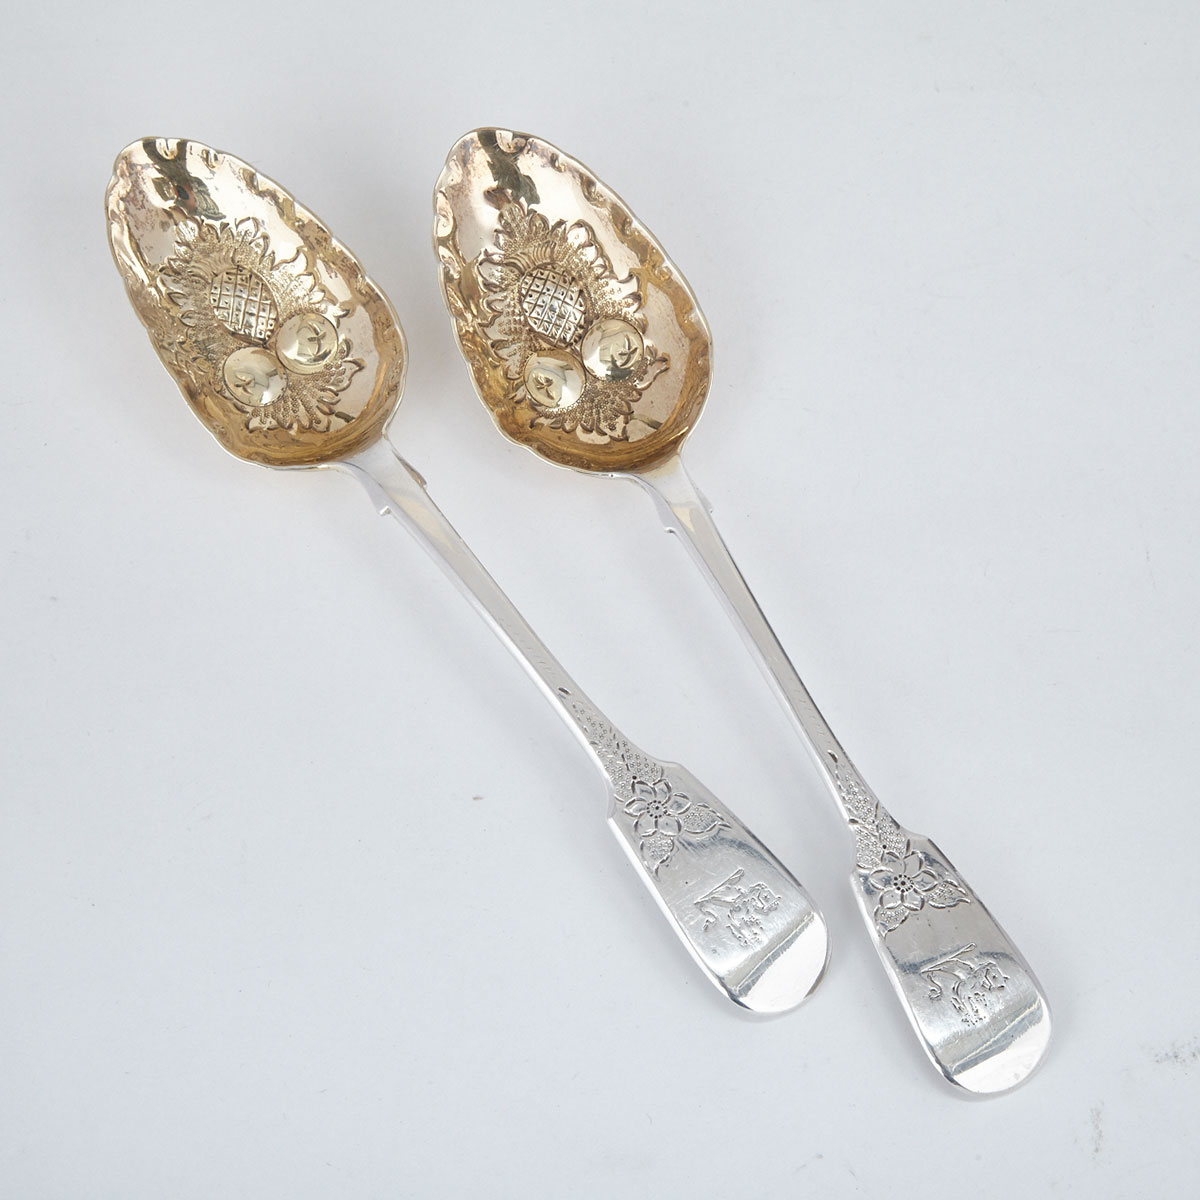 Pair of William IV Silver Fiddle Pattern Berry Spoons, Mary Chawner, London, 1834